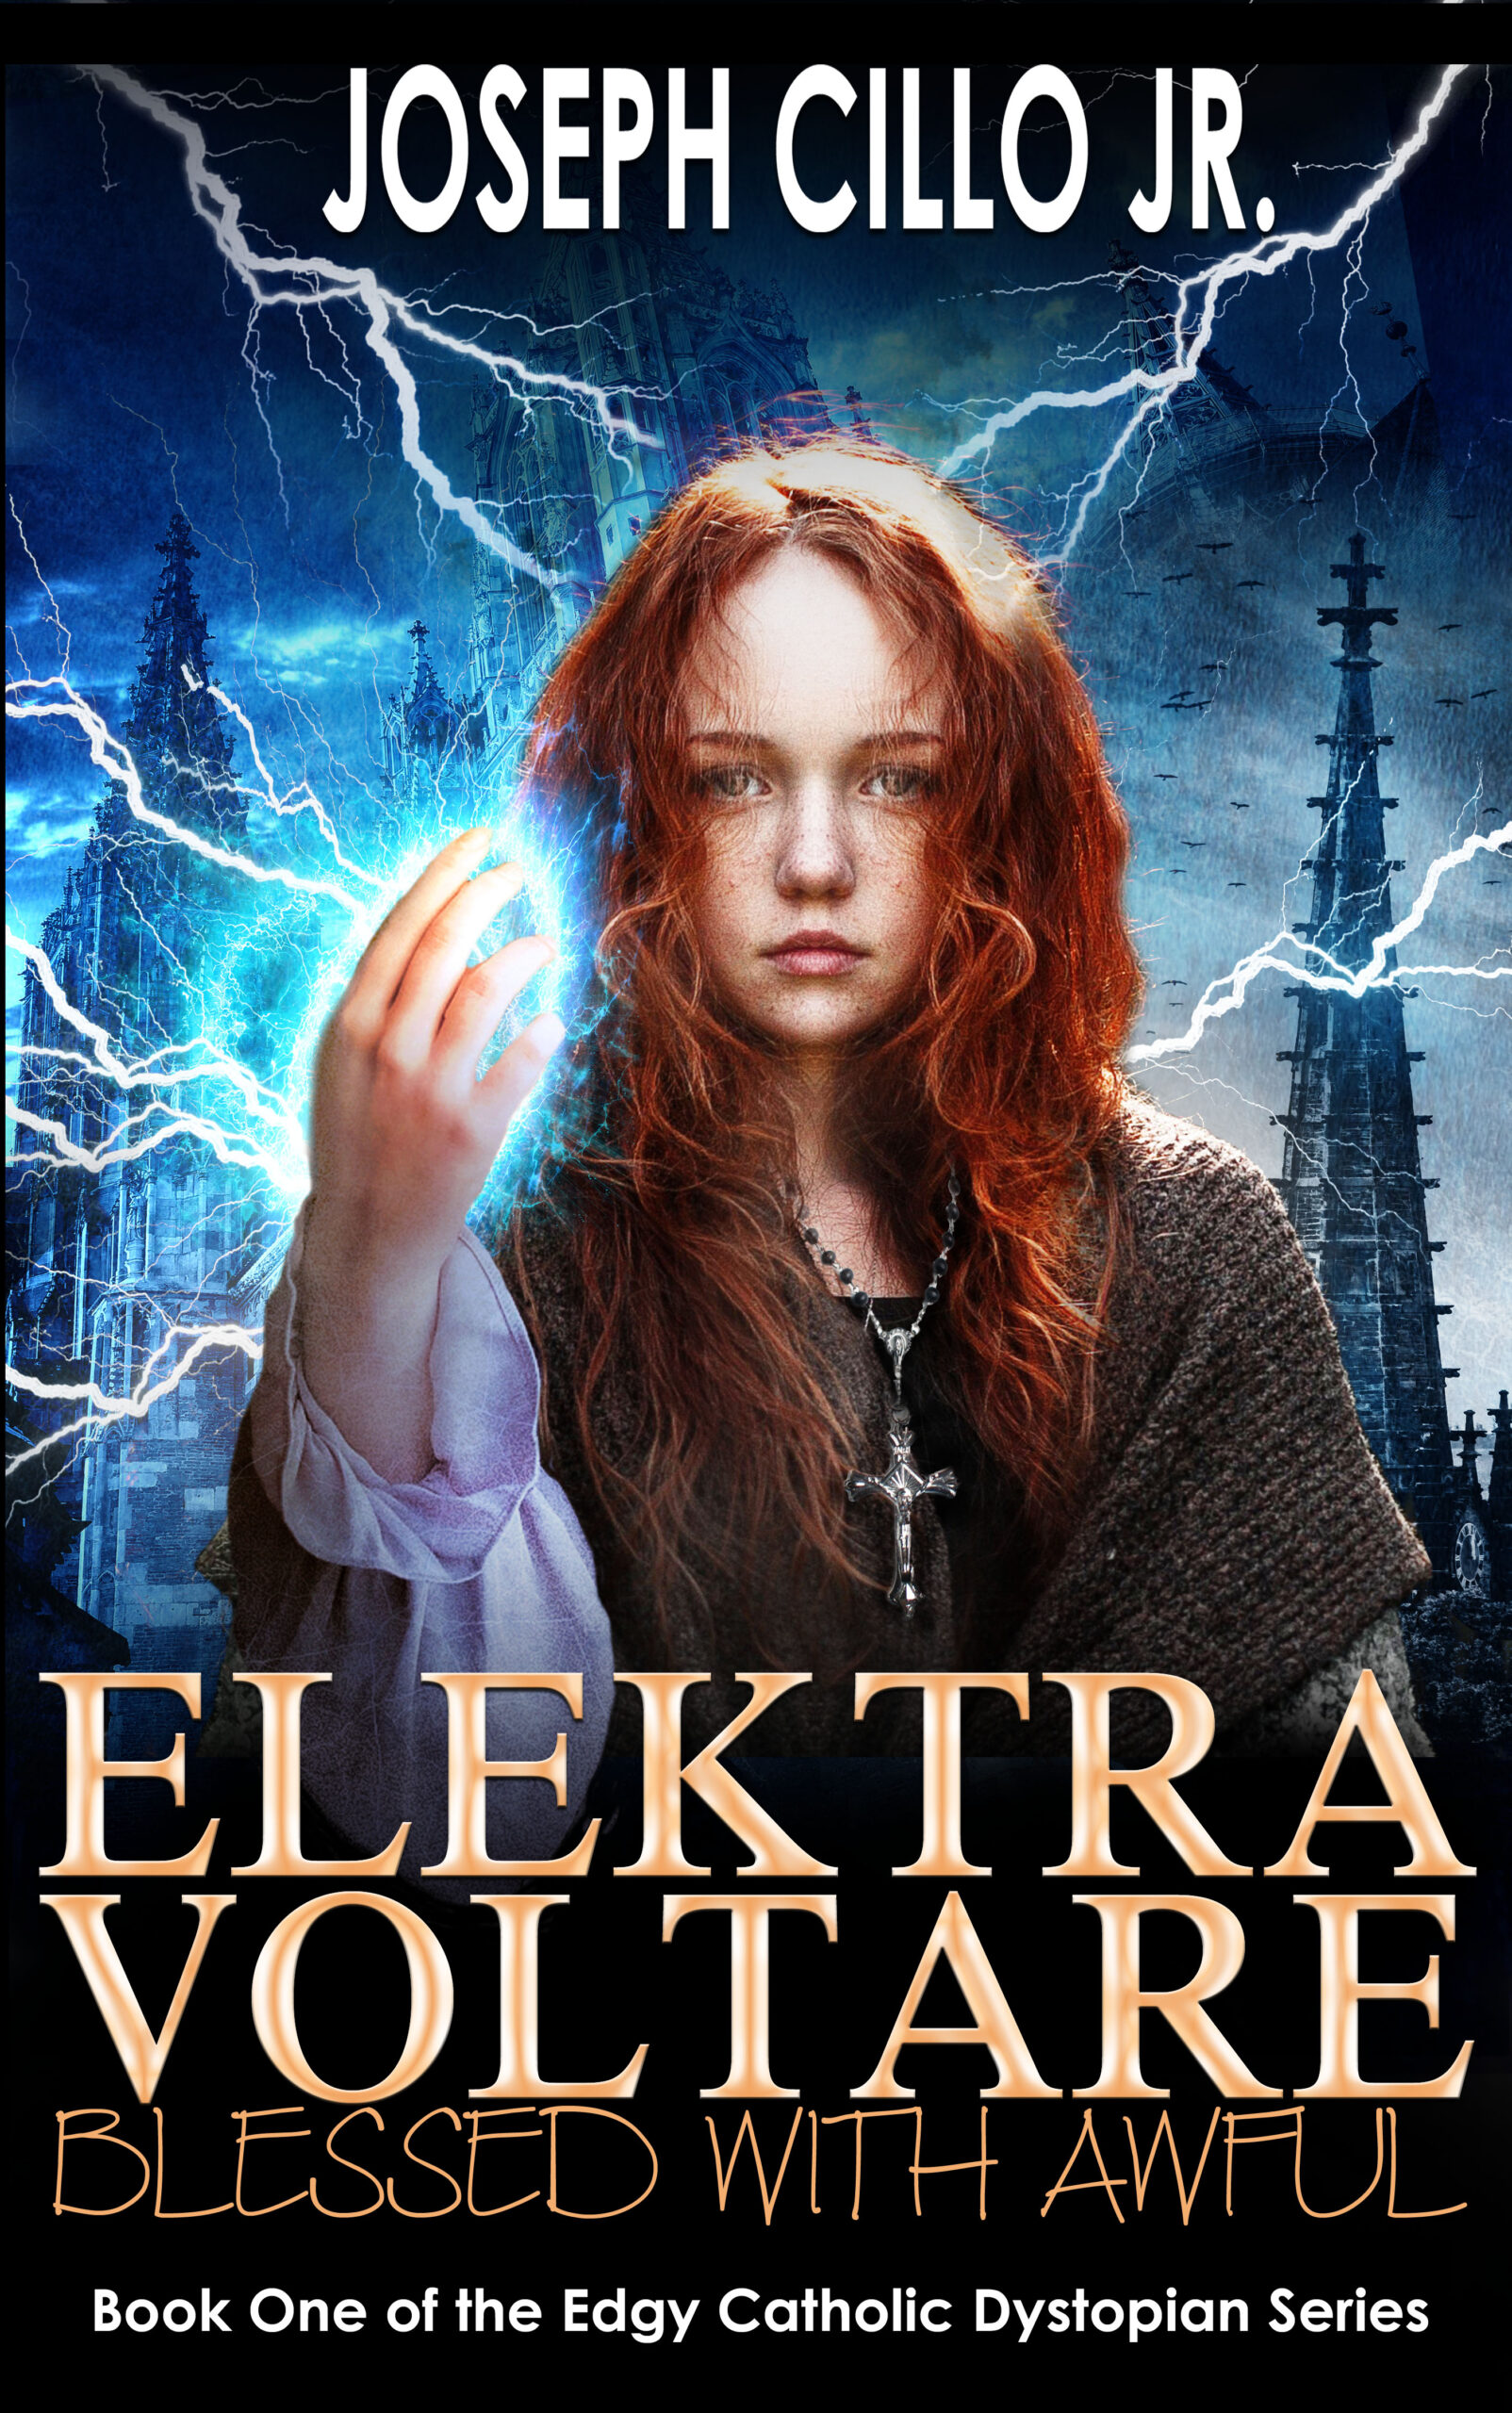 FREE: Elektra Voltare: Blessed with Awful by Joseph Cillo Jr